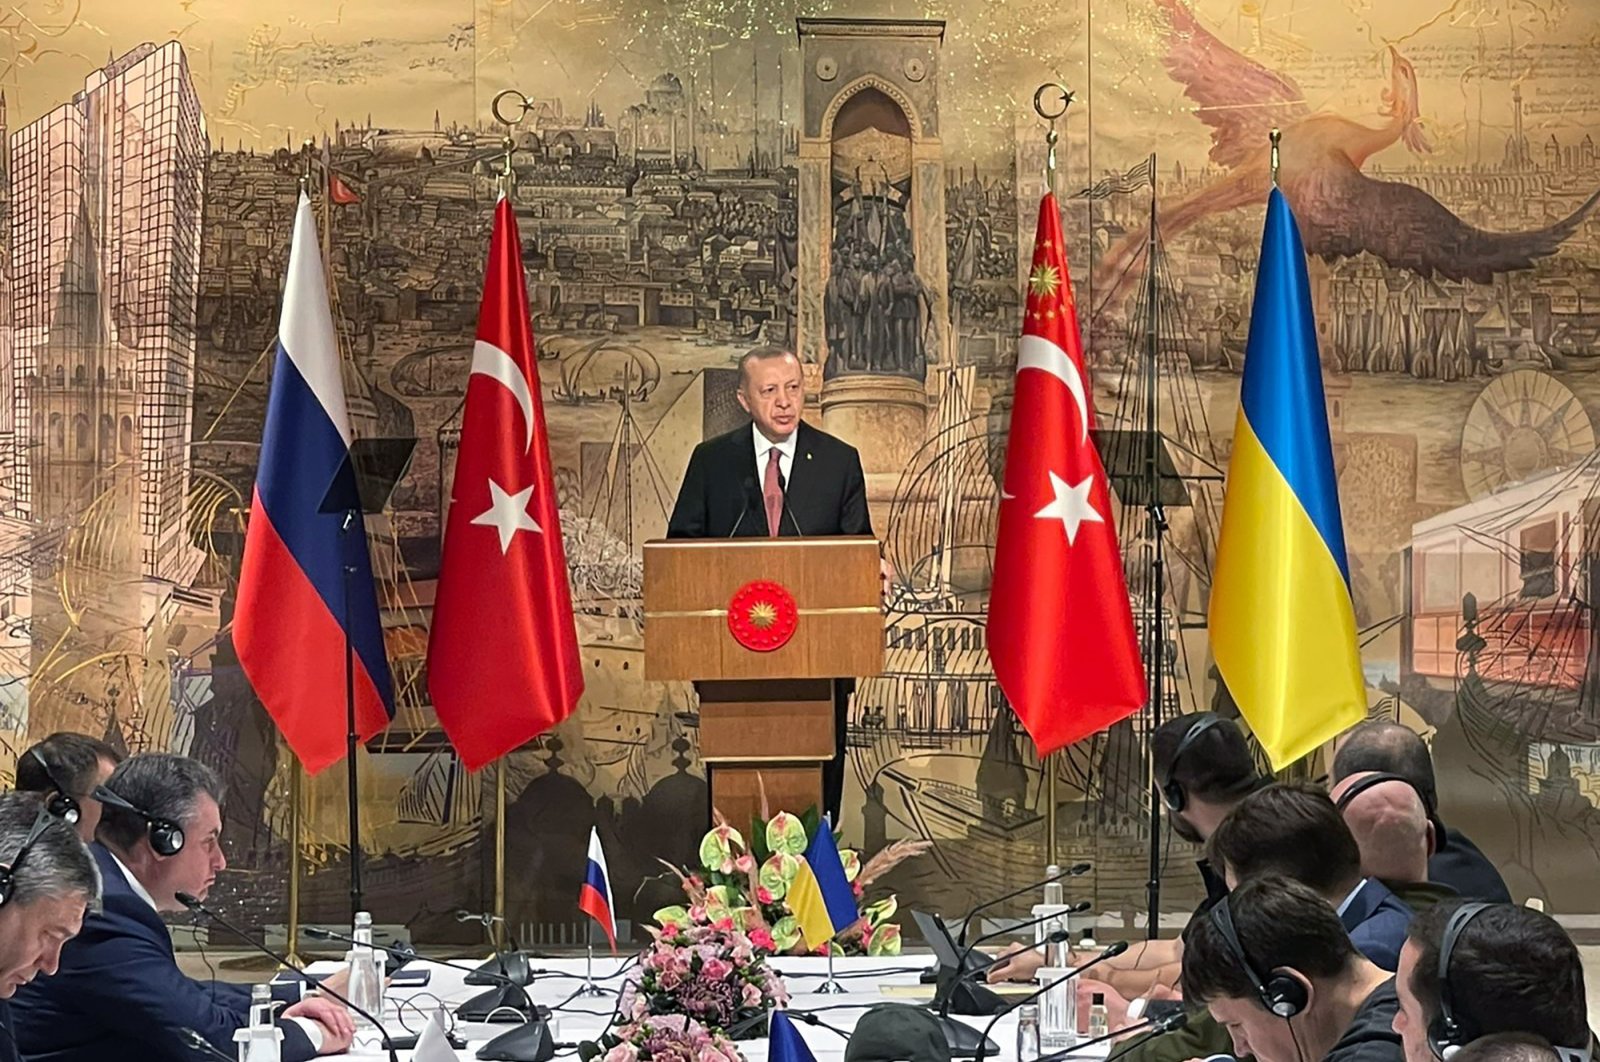 President Recep Tayyip Erdoğan gives a speech to welcome the Russian and Ukrainian delegations ahead of their talks, Istanbul, Turkey, March 29, 2022. (AP Photo)